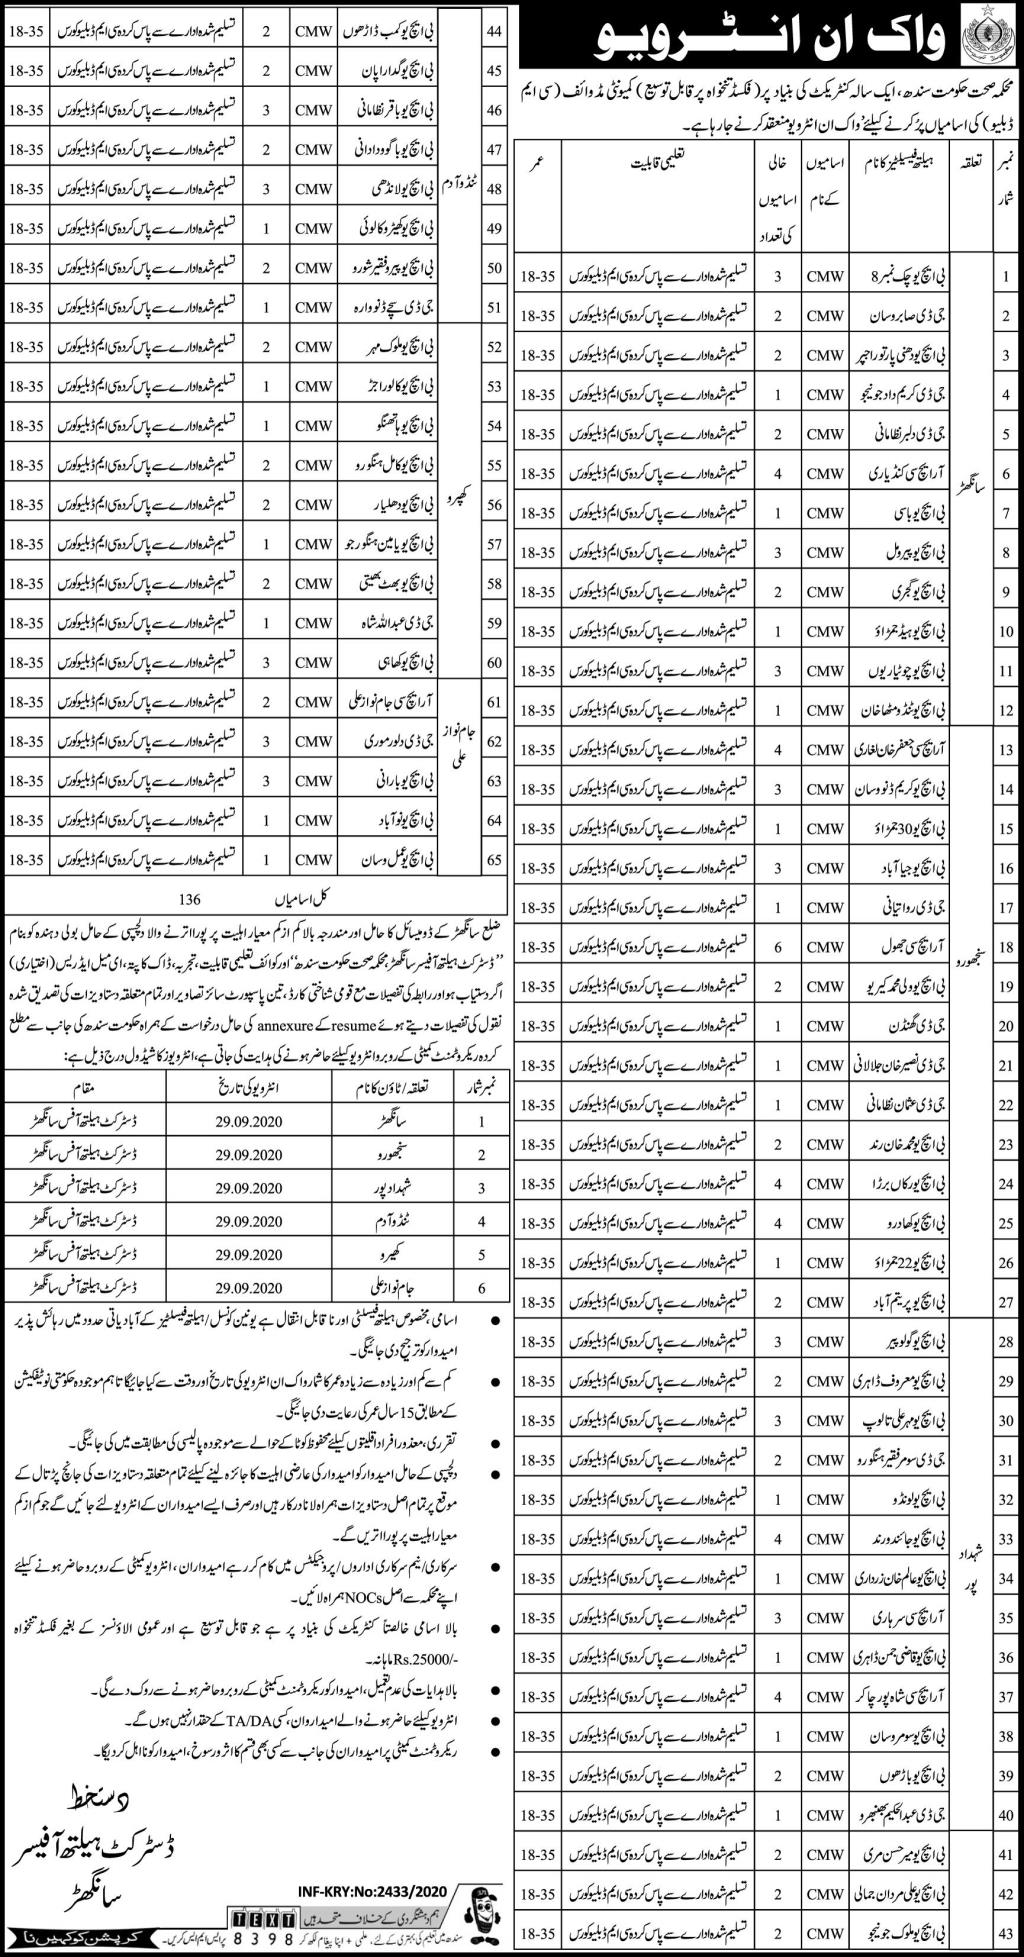  Community Midwife Jobs in Health Department Sanghar Sindh 2020 September CMW Walk in Interview Latest